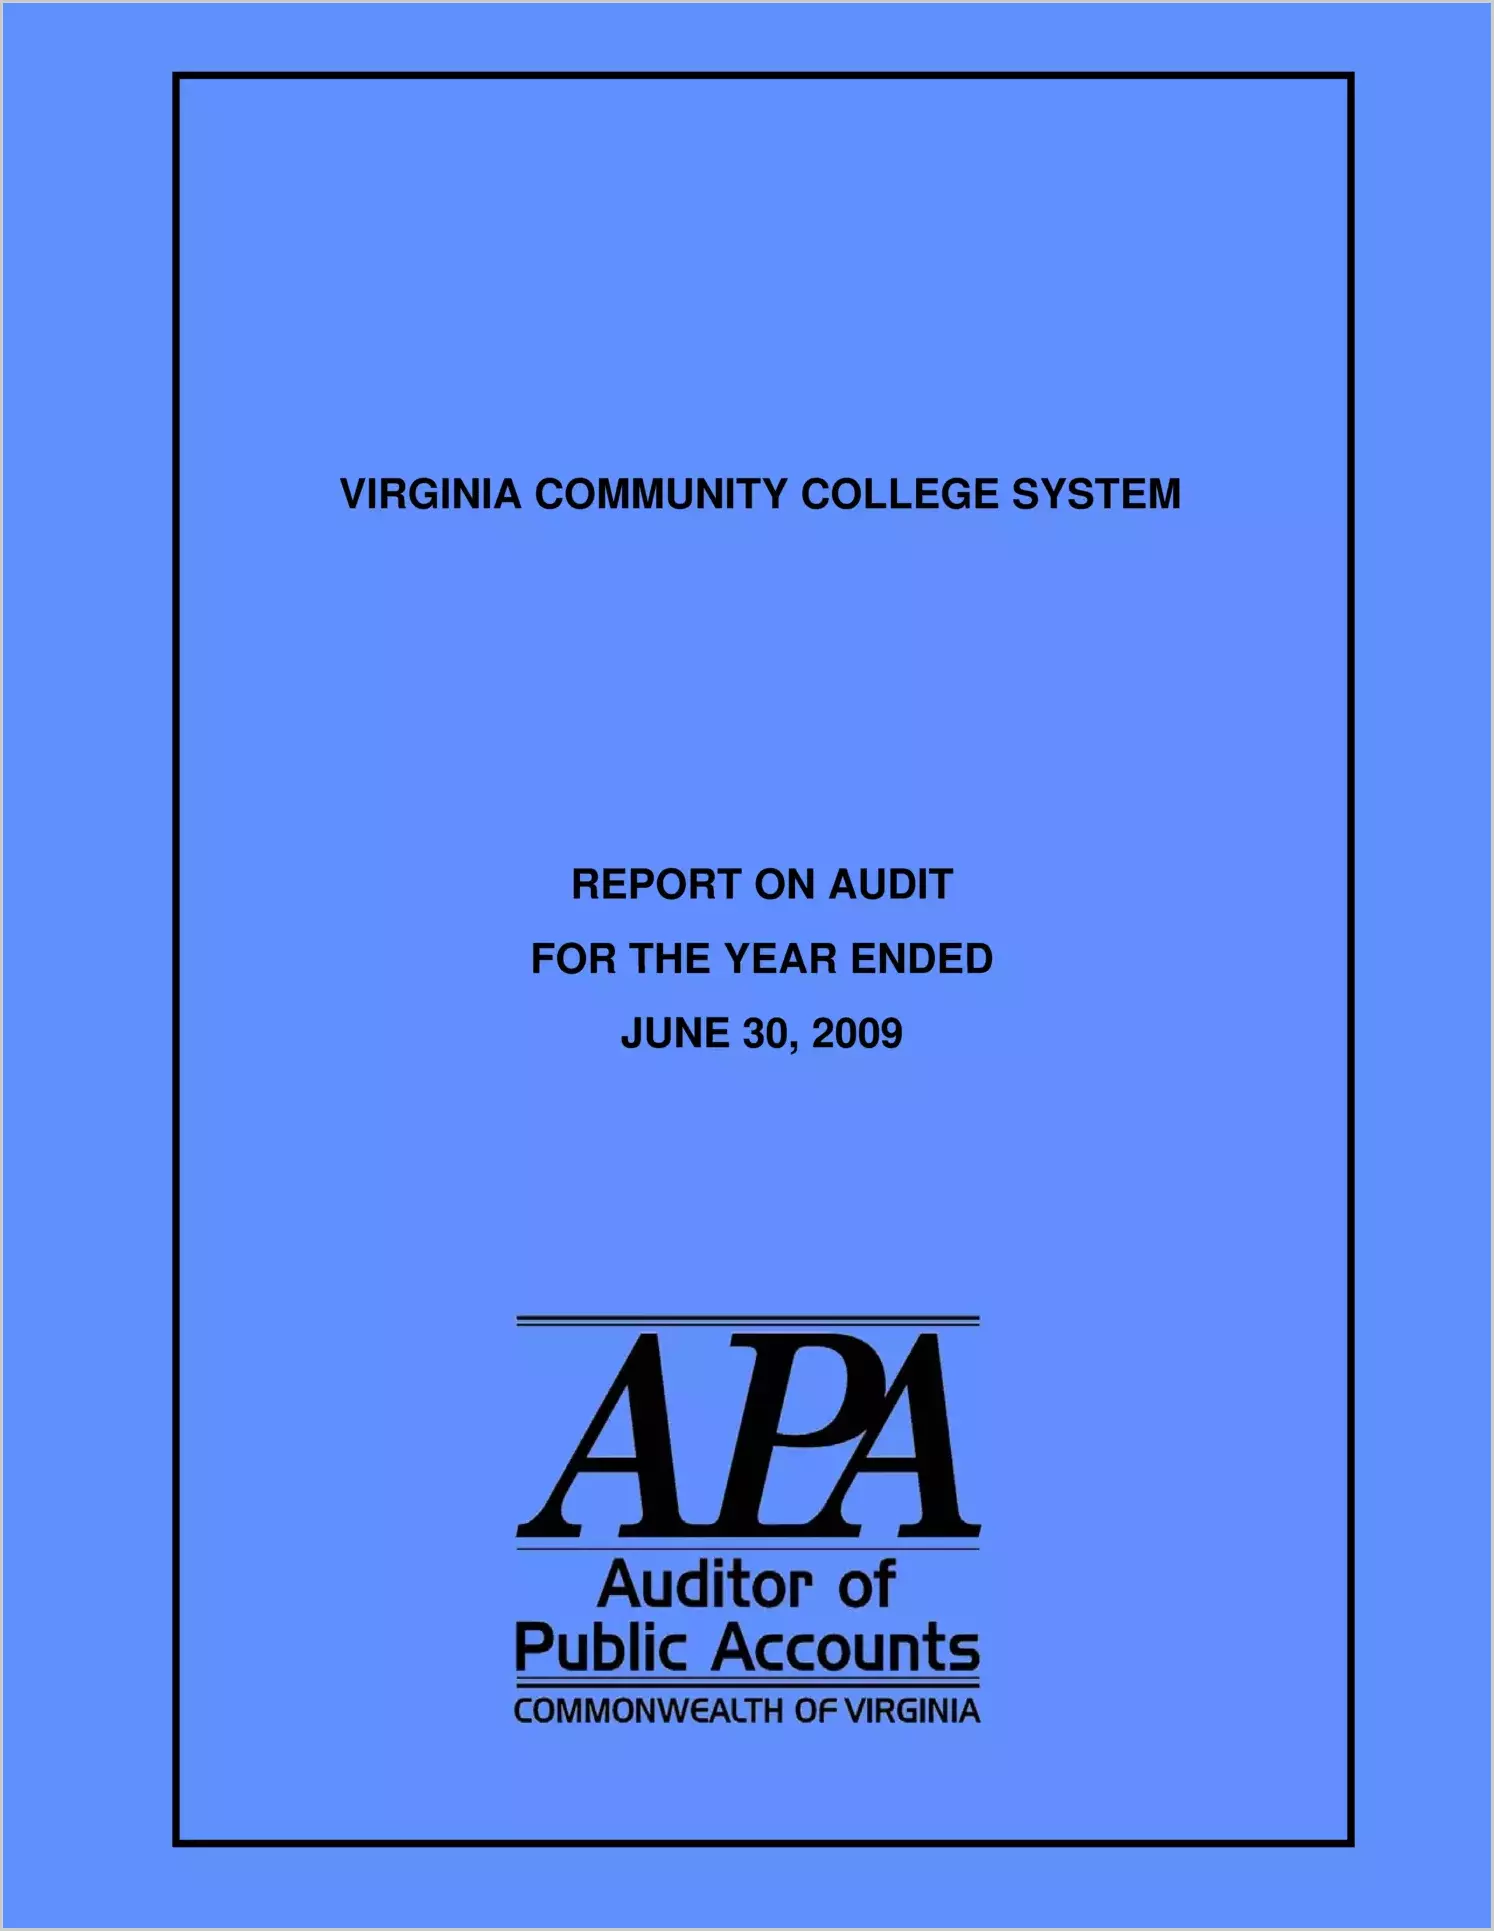 Virginia Community College System report on audit for the year ended June 30, 2009